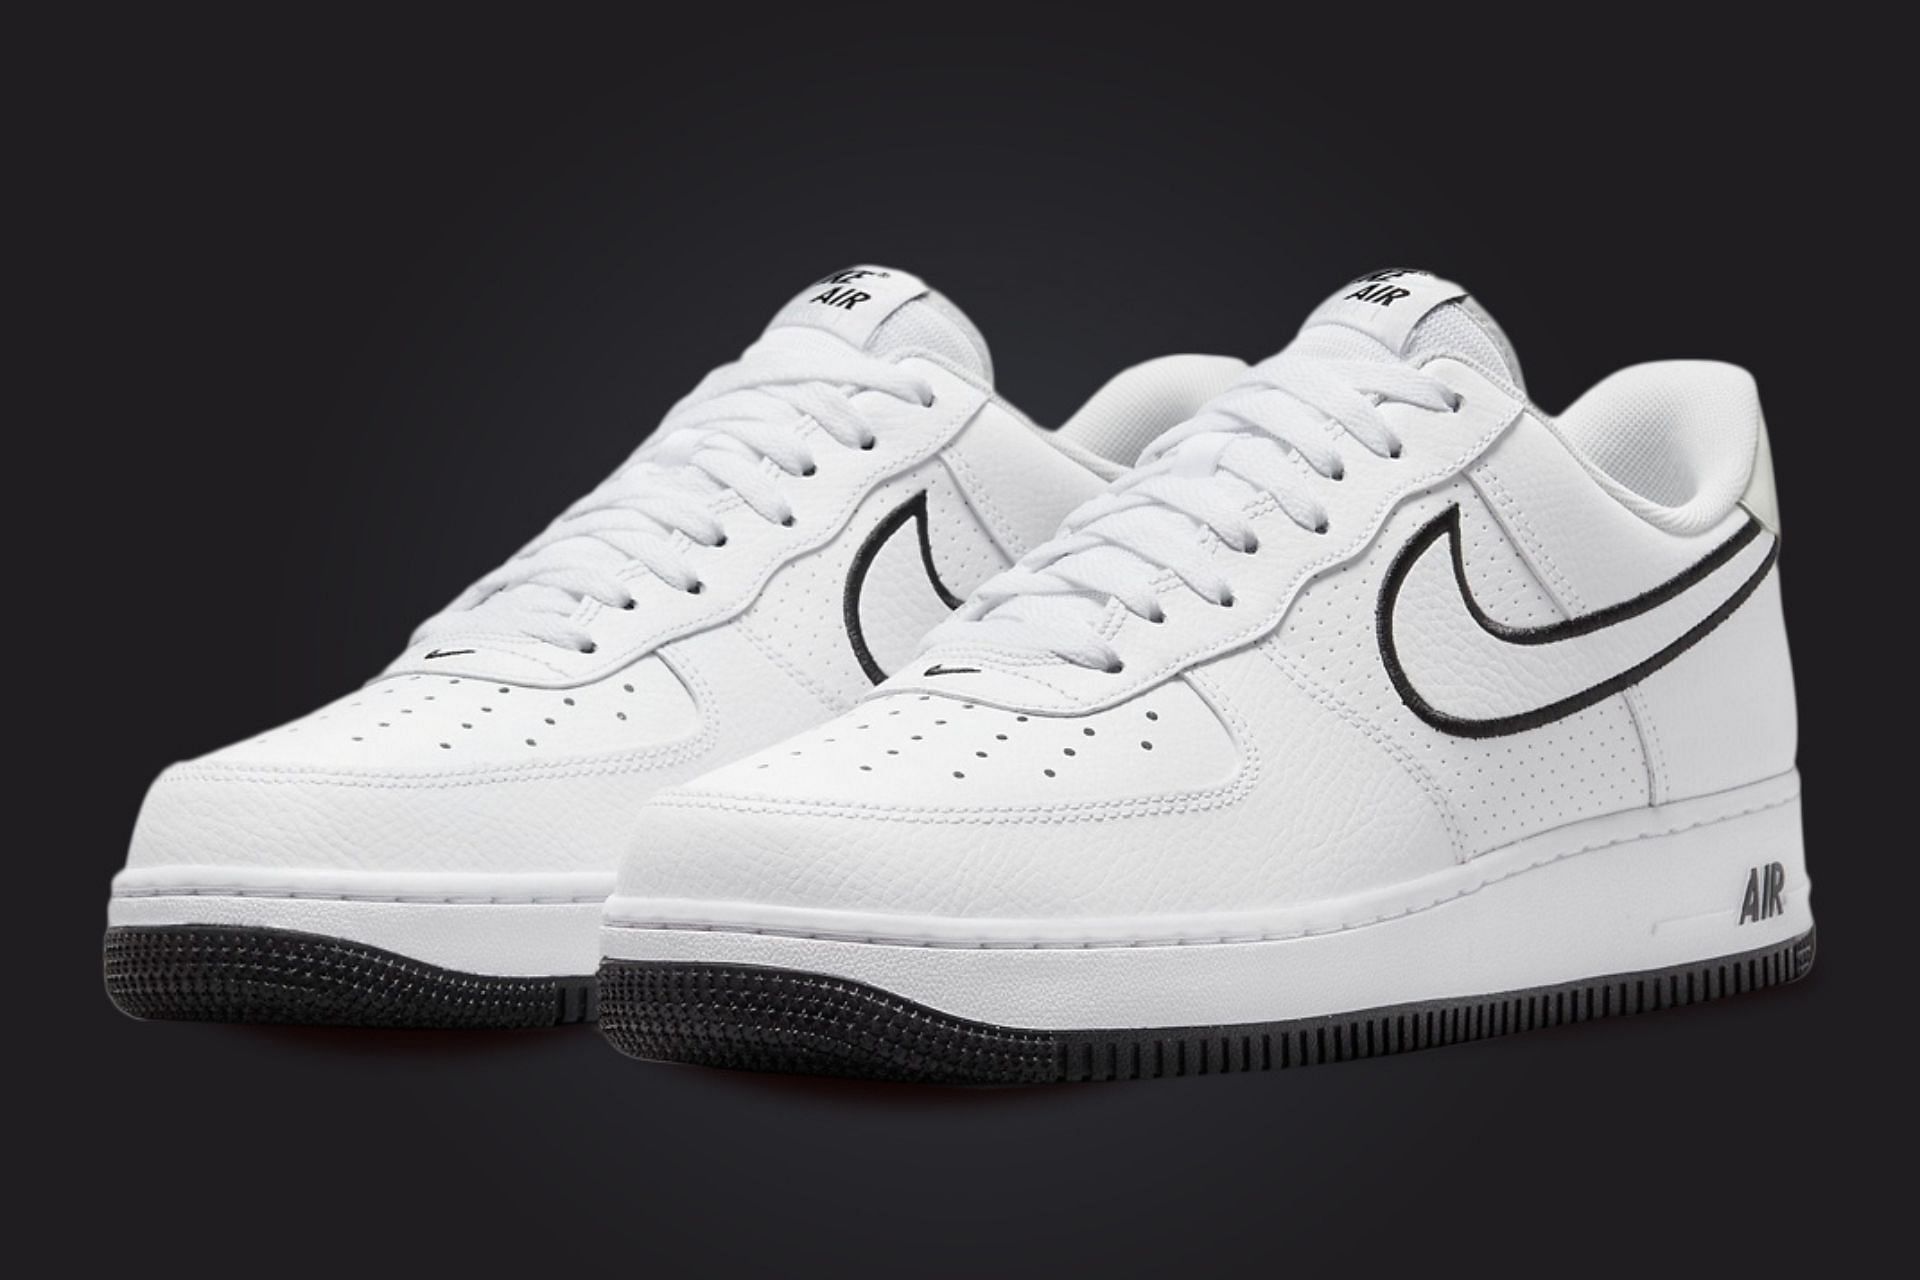 Air Force 1: Nike Air Force Low Embroidered Swoosh "White/Black" shoes: Where to buy, price, and more